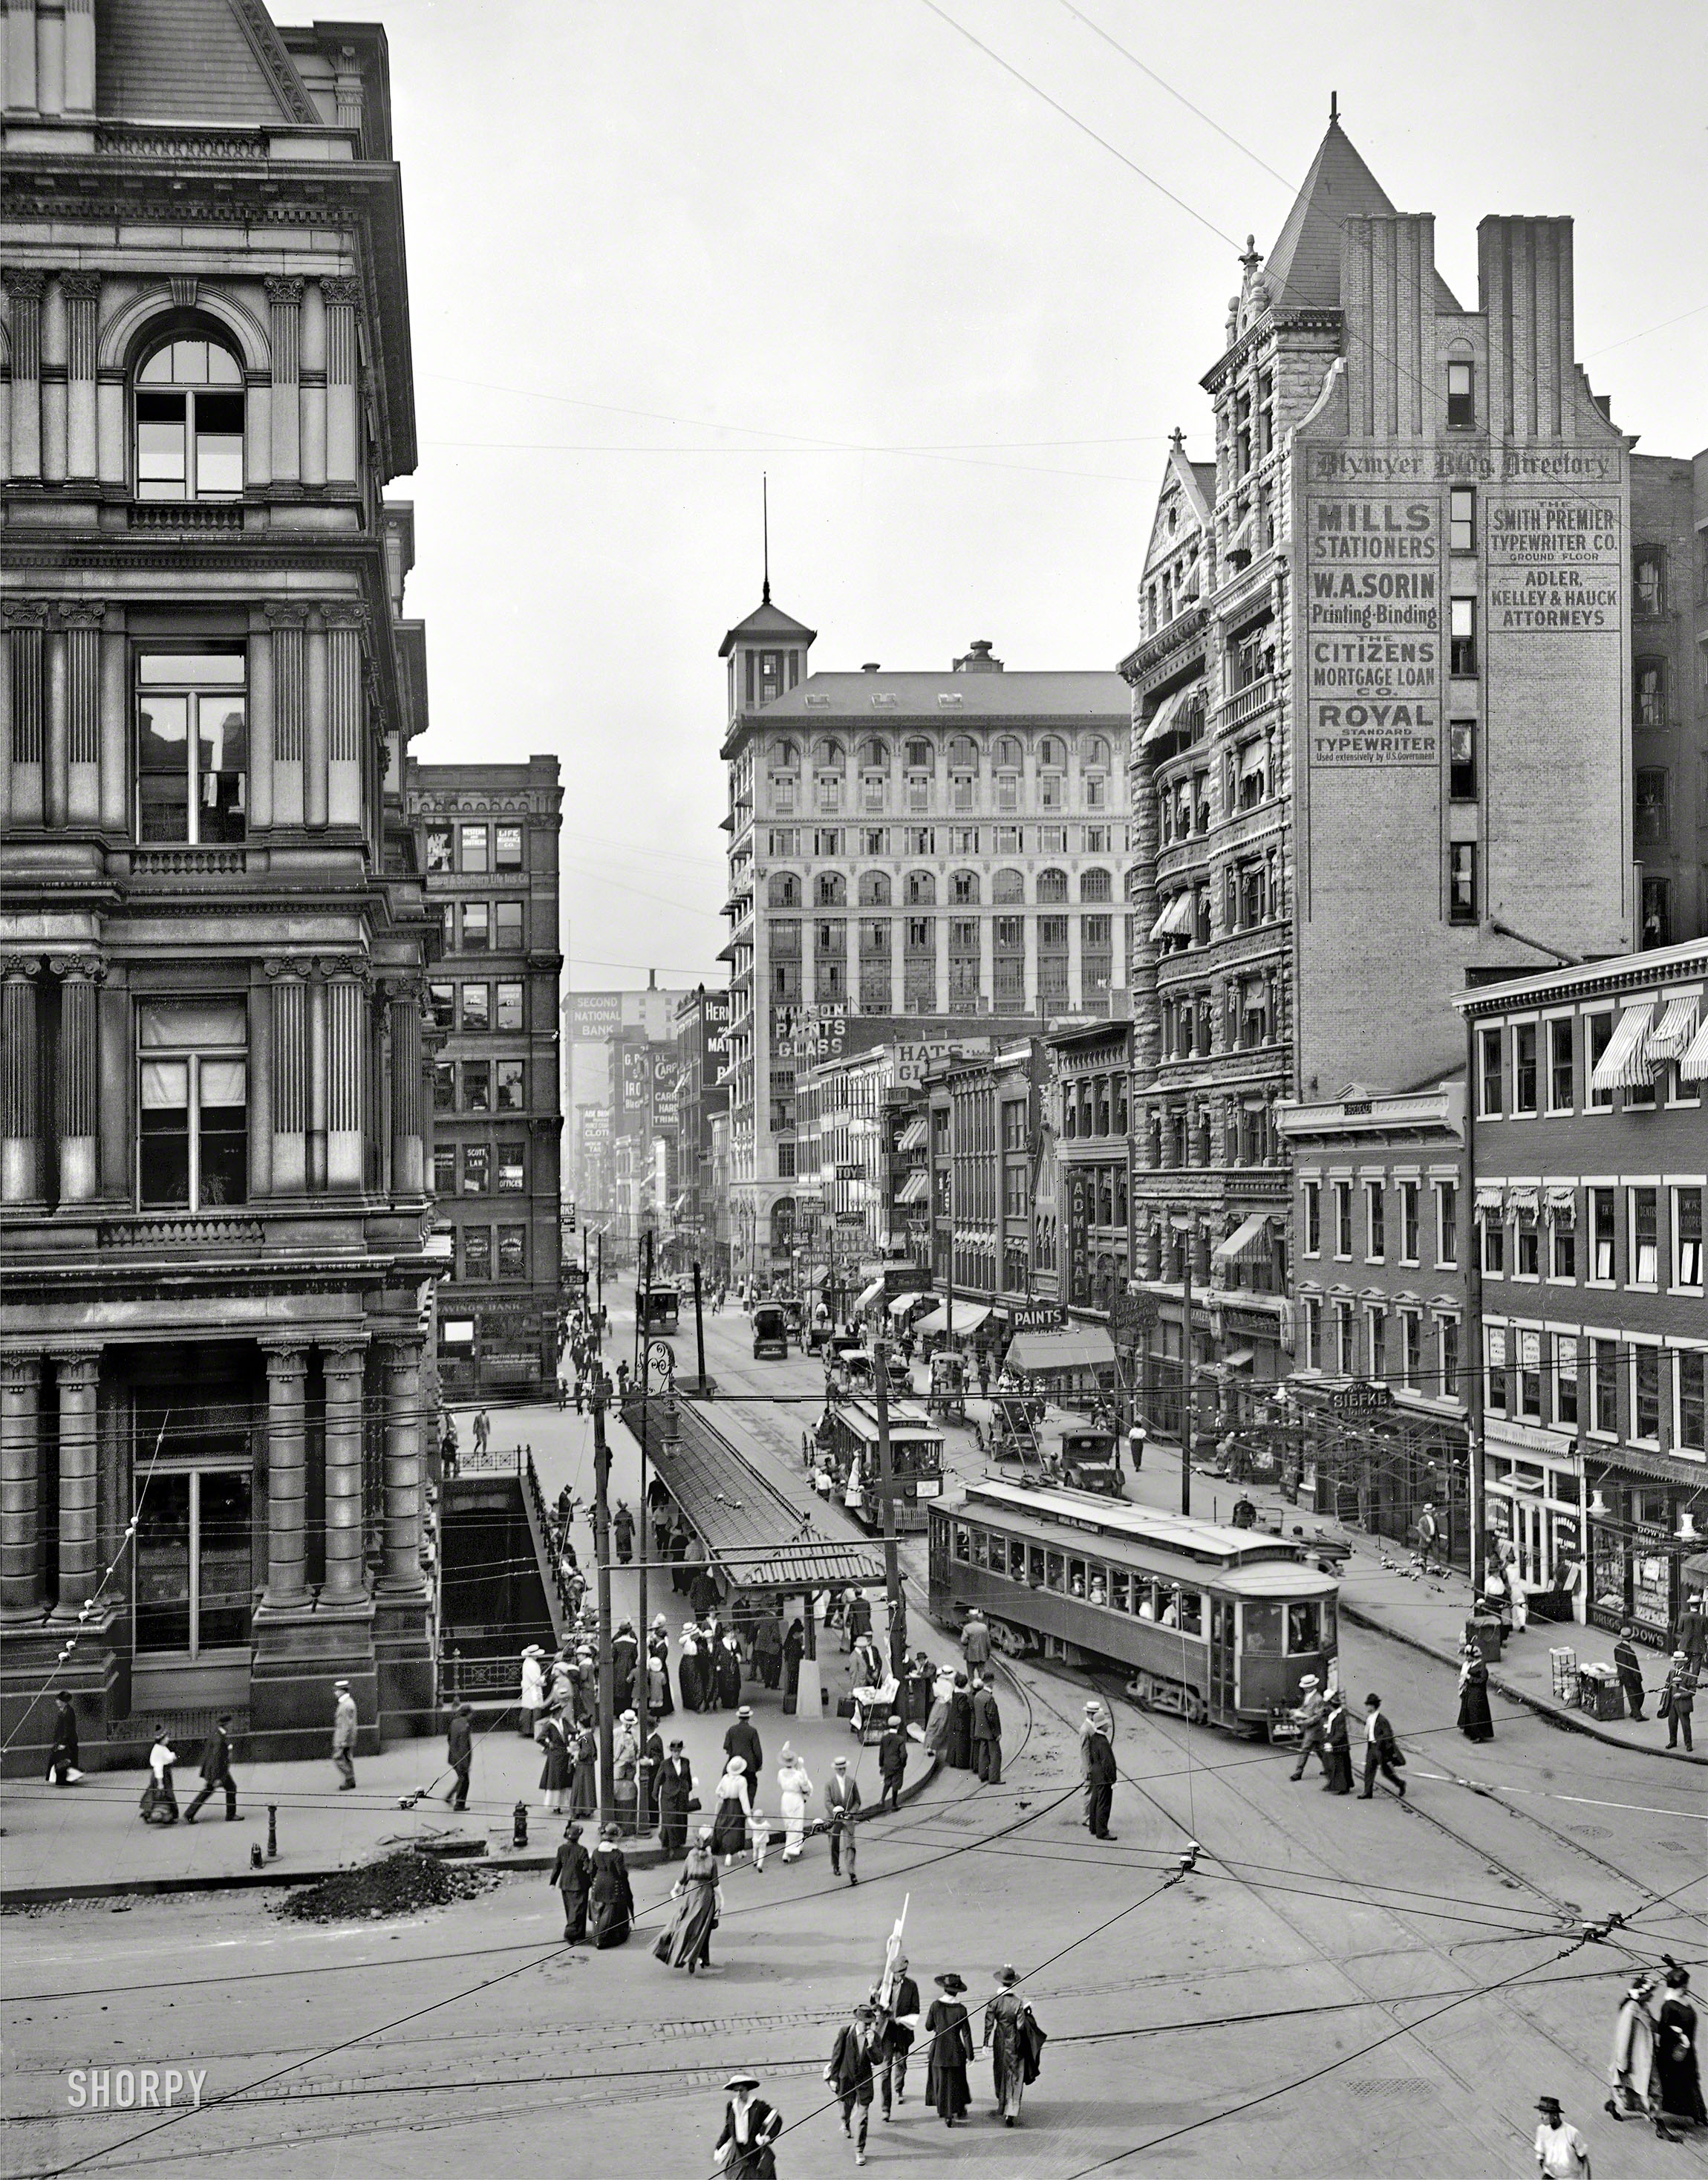 Cincinnati circa 1912. "Main Street from Fountain Square." With a nice view of the Blymyer Building. 8x10 glass negative, Detroit Publishing Co. View full size.